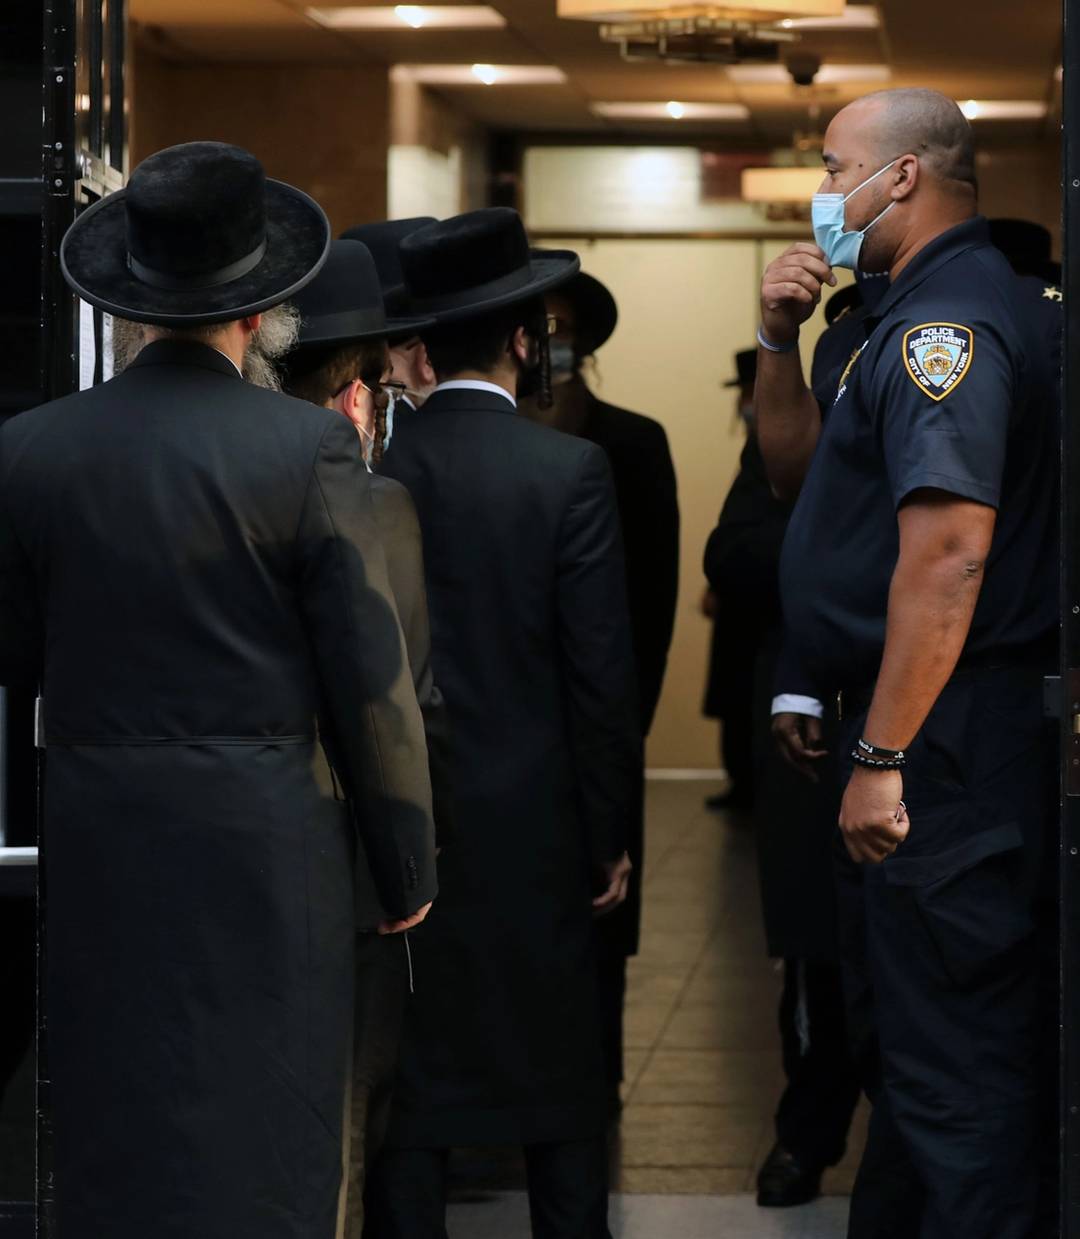 People congregate outside of the Congregation Yetev Lev D'Satmar synagogue on Oct. 19, 2020, in Brooklyn's Williamsburg neighborhood. A wedding planned for a grandchild of Zalman Leib Teitelbaum, a grand rabbi of the Satmar sect, was ordered to be shut down after New York City authorities were alerted that the event could draw as many as 10,000 celebrants to Williamsburg during a COVID-19 outbreak in the community.